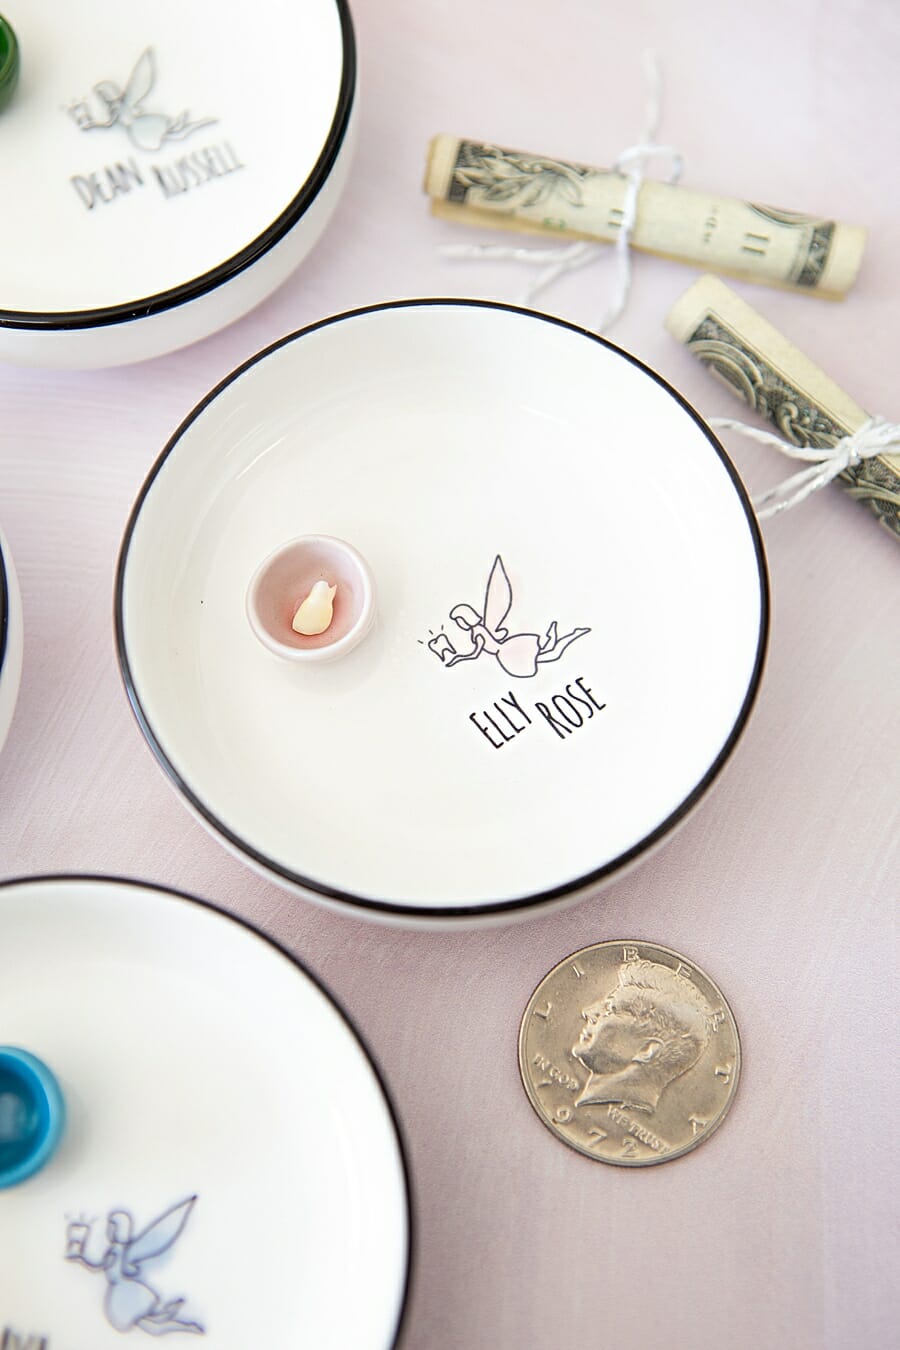 The cutest handmade tooth fairy dishes, see how we made them!